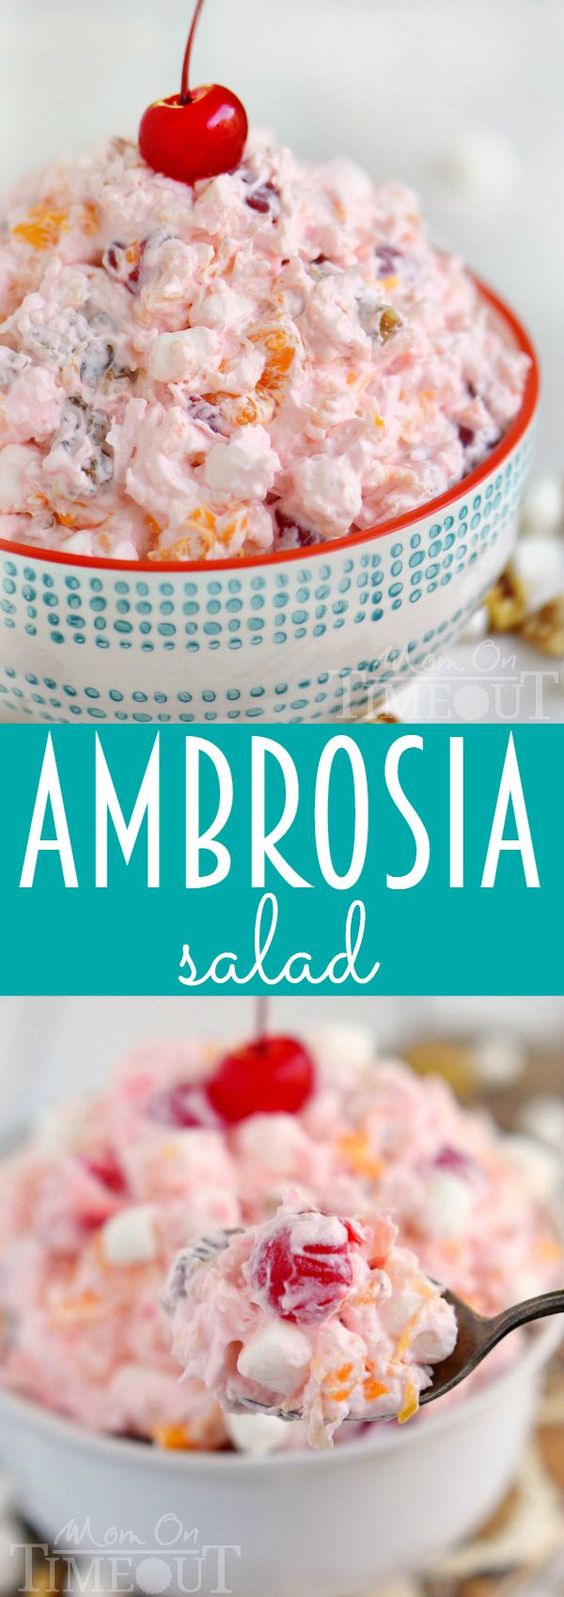 This delicious Ambrosia Salad is so easy to make and always a big hit with kids and adults alike! Made in just one bowl, this classic dessert salad is the perfection addition to your next gathering! // Mom On Timeout #recipe #ambrosia #dessert #nobake #desserts #recipes #momontimeout